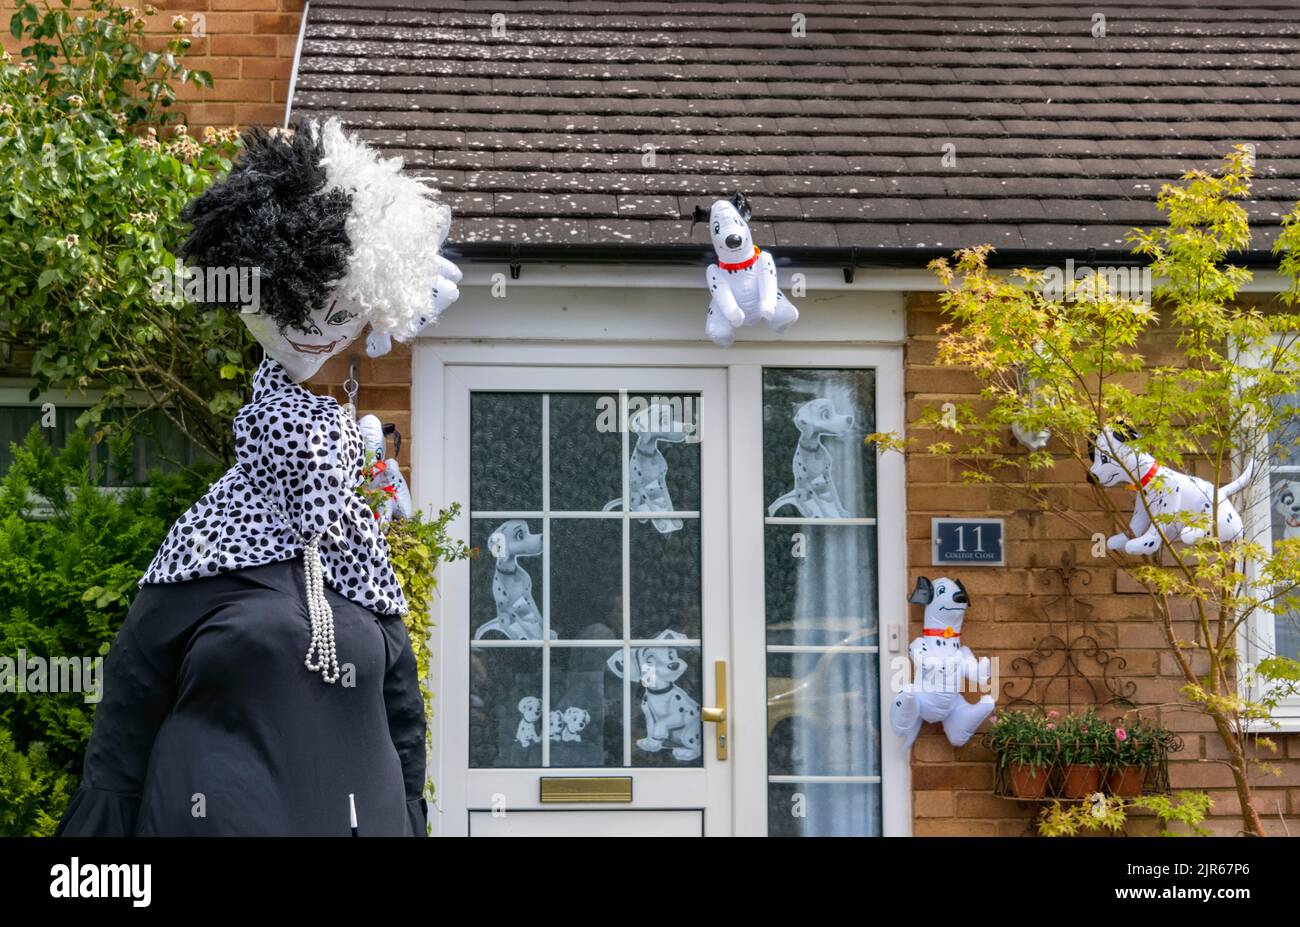 Flamstead Scarecrow Festival 2022 - Cruella de Vil and 101 Dalmations scarecrow and foil Dalmatian dogs decorating the outside of a house, Flamstead. Stock Photo